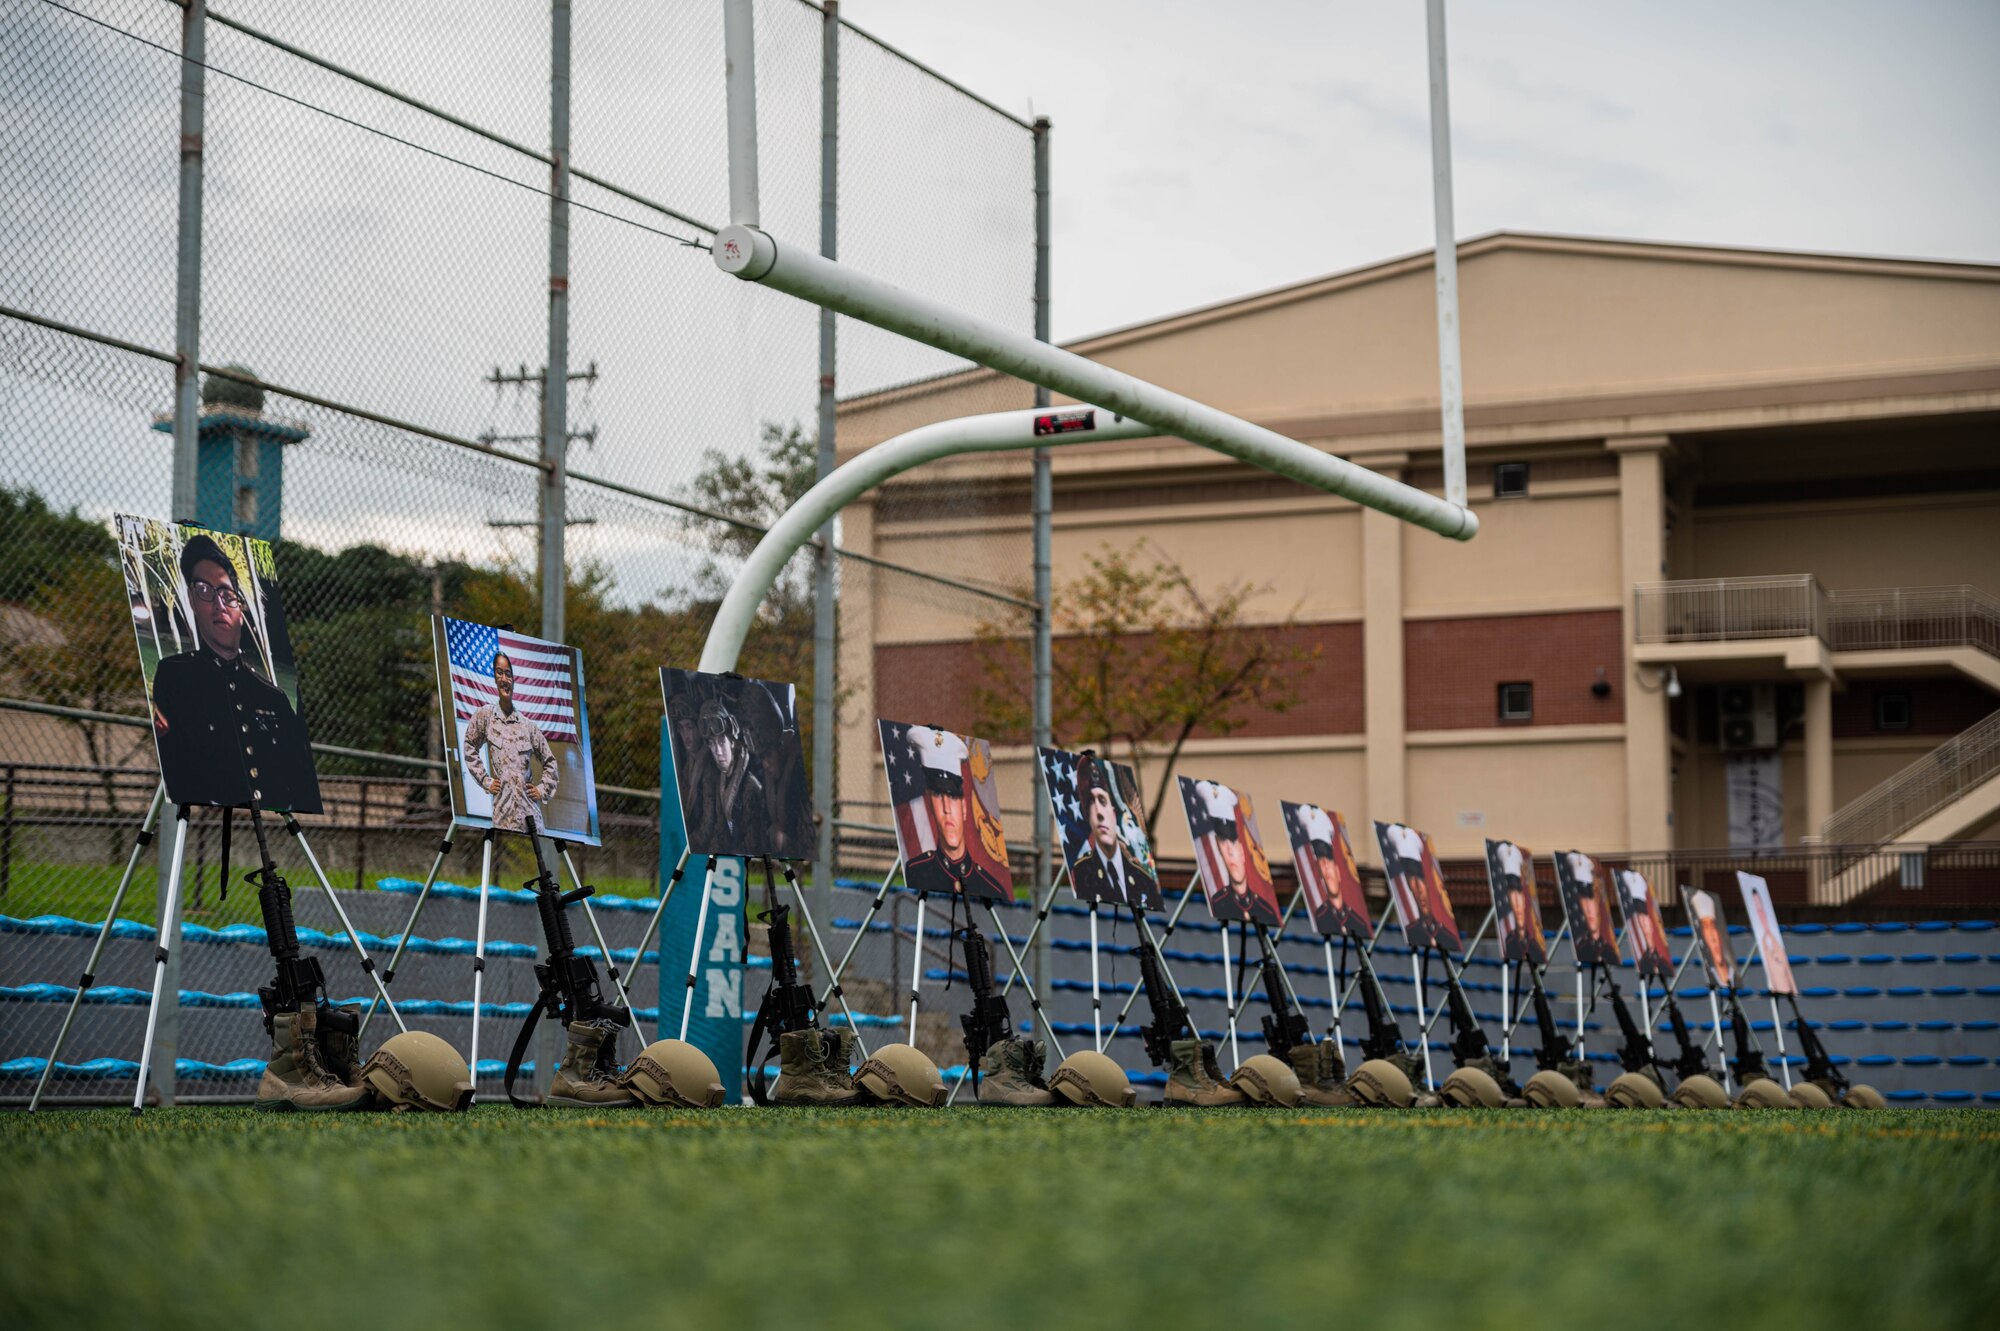 Battlefield Crosses of the 13 U.S. service members that perished in Afghanistan were on display as Airmen of Team Osan prepare for a memorial ruck march